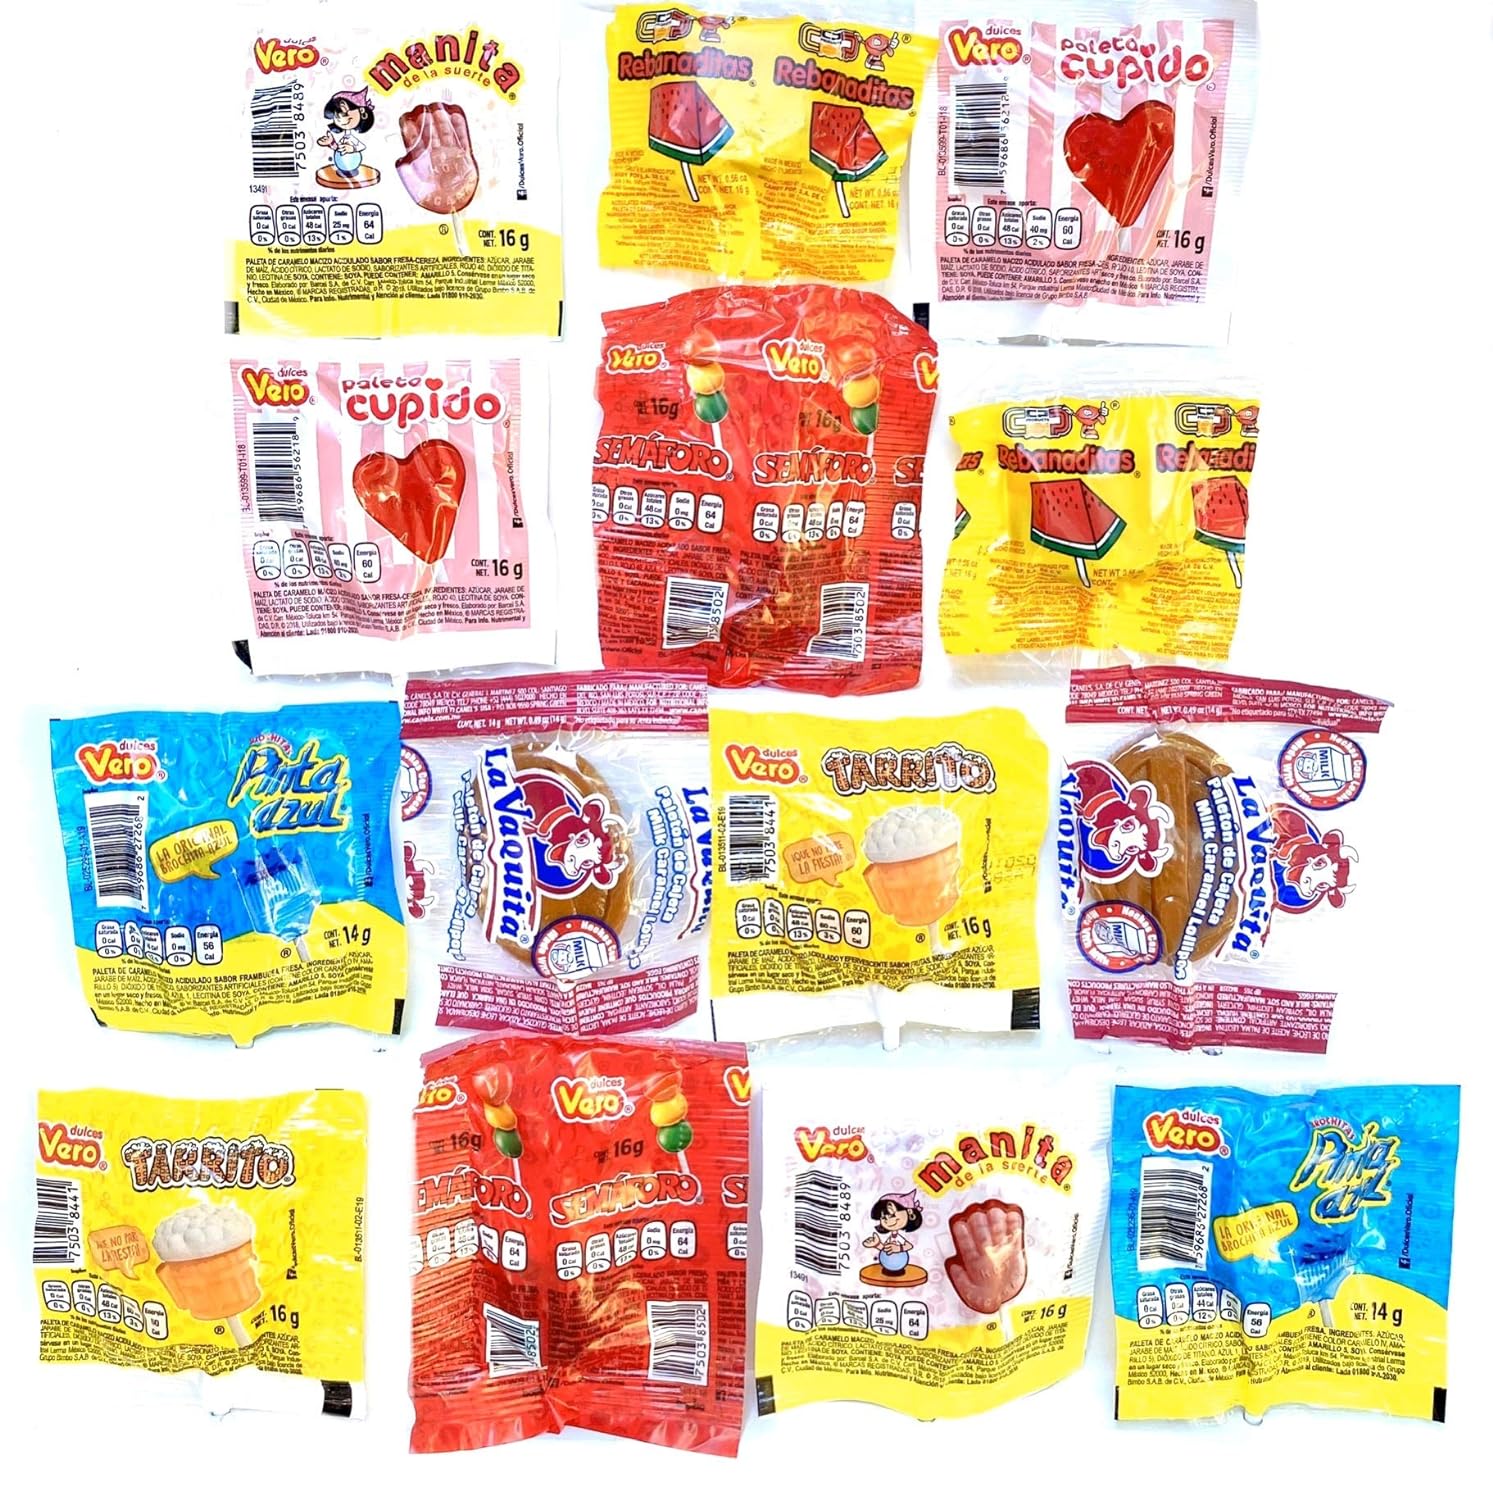  Just One More Thing Ultimate Mexican Candy Premium Lollipop Assortment Pack Sweet Flavors Edition (14 Count) Variety of Sweet Treats For Everyone Vero Lollipops Dulces Mexicanos Paletas by Just One Mo